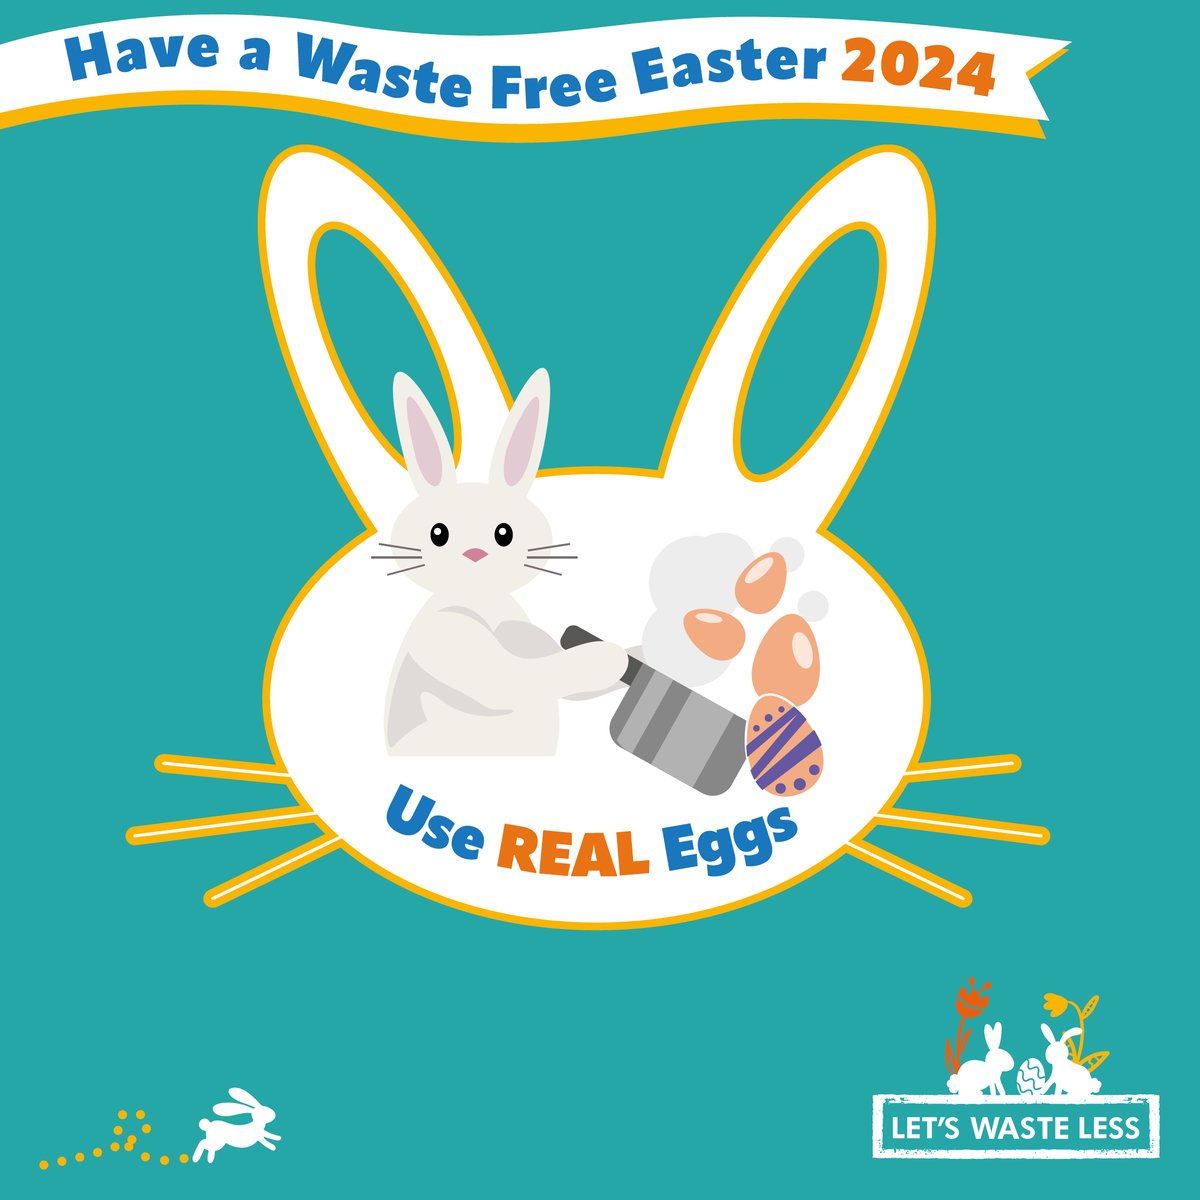 🐣🥚 Ready for a fun twist on the classic Easter egg hunt?  Instead of plastic eggs, use real, hard-boiled eggs! Get the kids involved in decorating them, and after the hunt, enjoy delicious egg sandwiches together! bit.ly/3TzTXUL
#letswasteless #egghuntfun